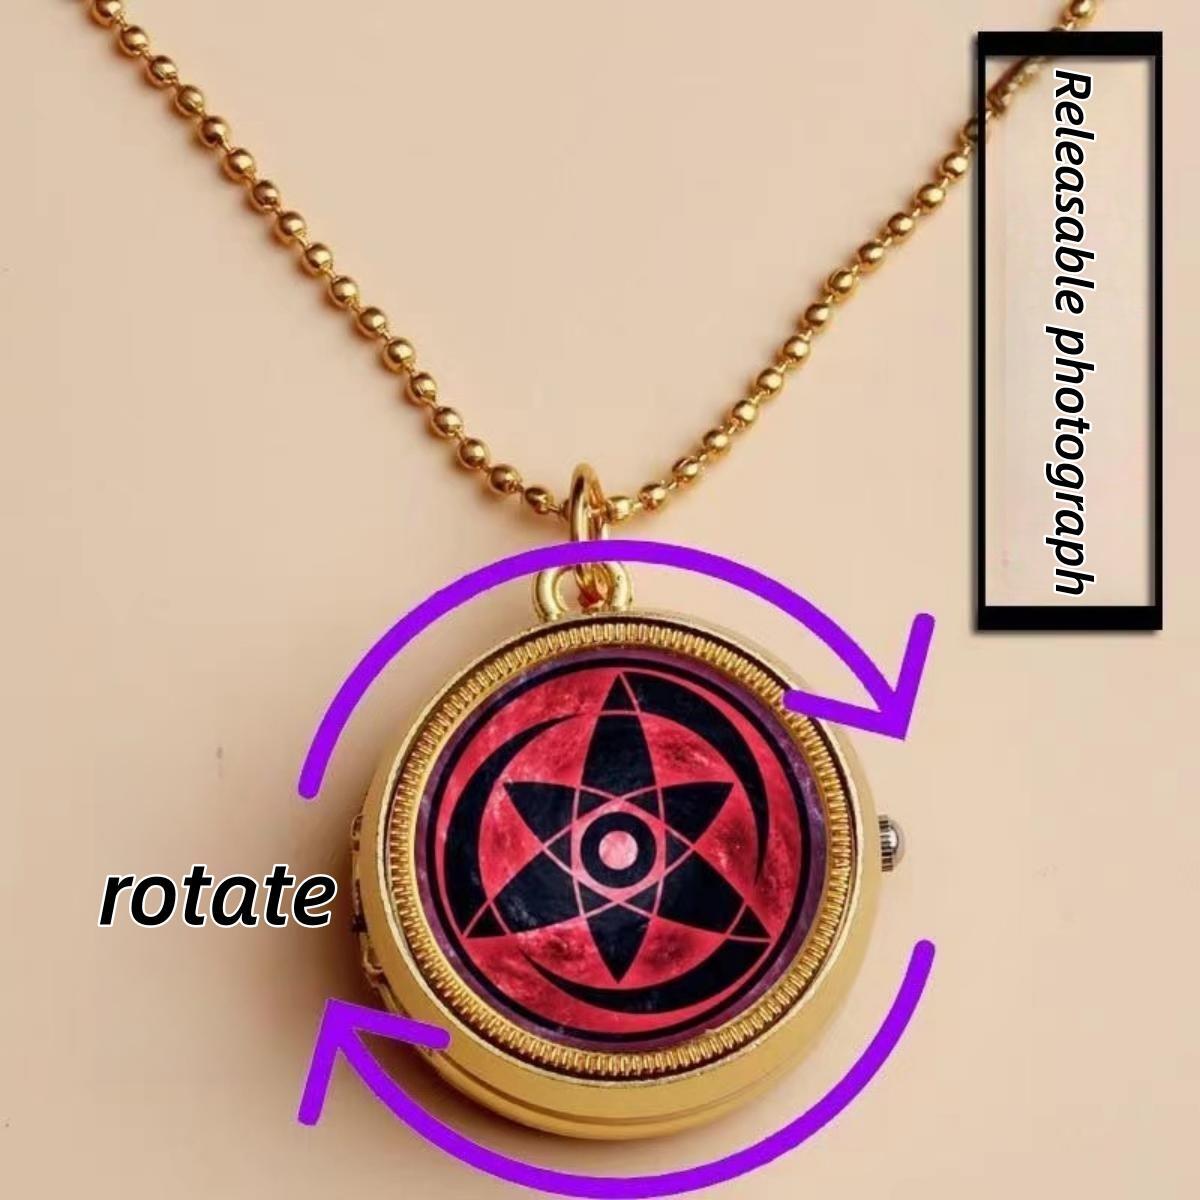 kakashi and other classic superheroes and anime characters related to the unique shape, beautiful pattern writing wheel eye pocket watch.